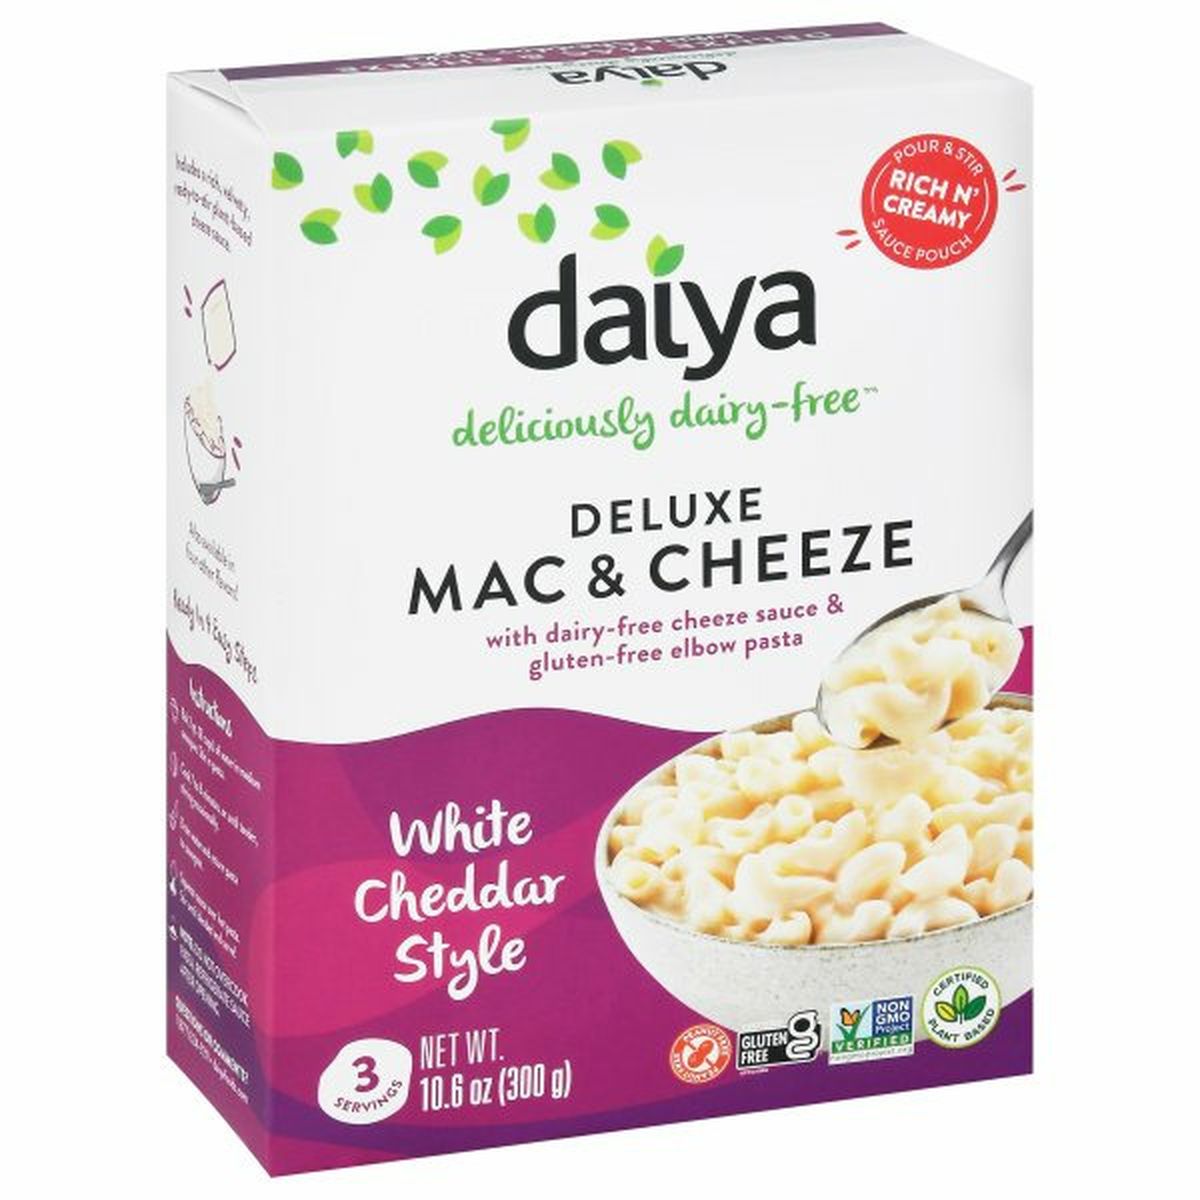 Calories in Daiya Mac & Cheeze, Deluxe, White Cheddar Style